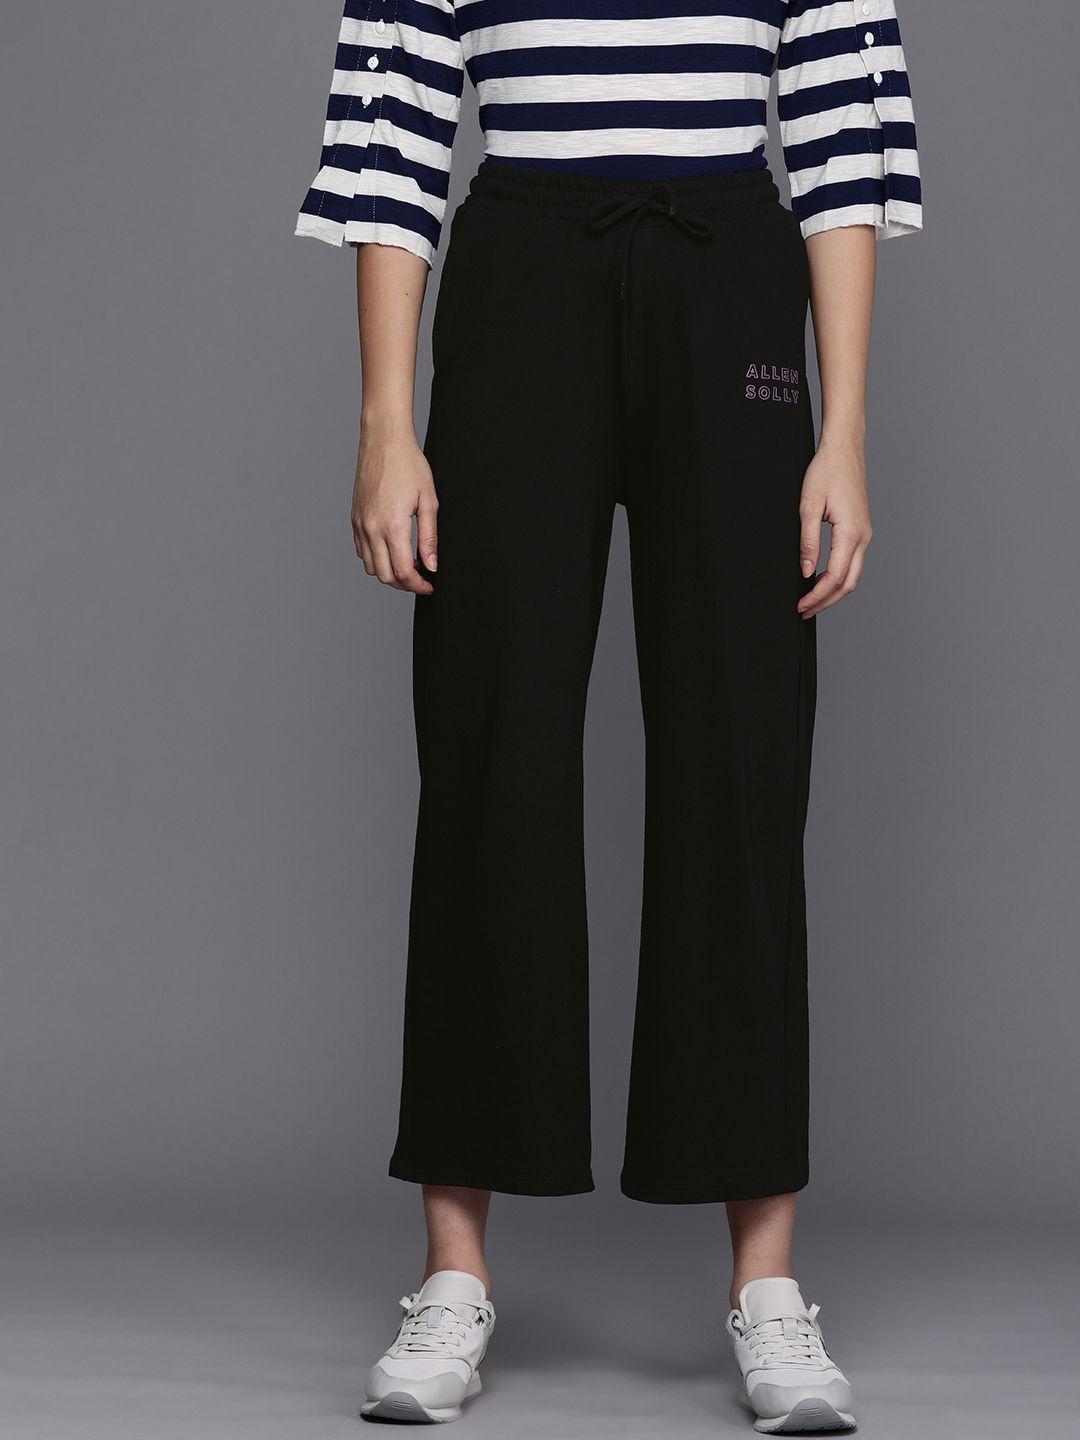 allen-solly-woman-women-black-flared-high-rise-culottes-trousers